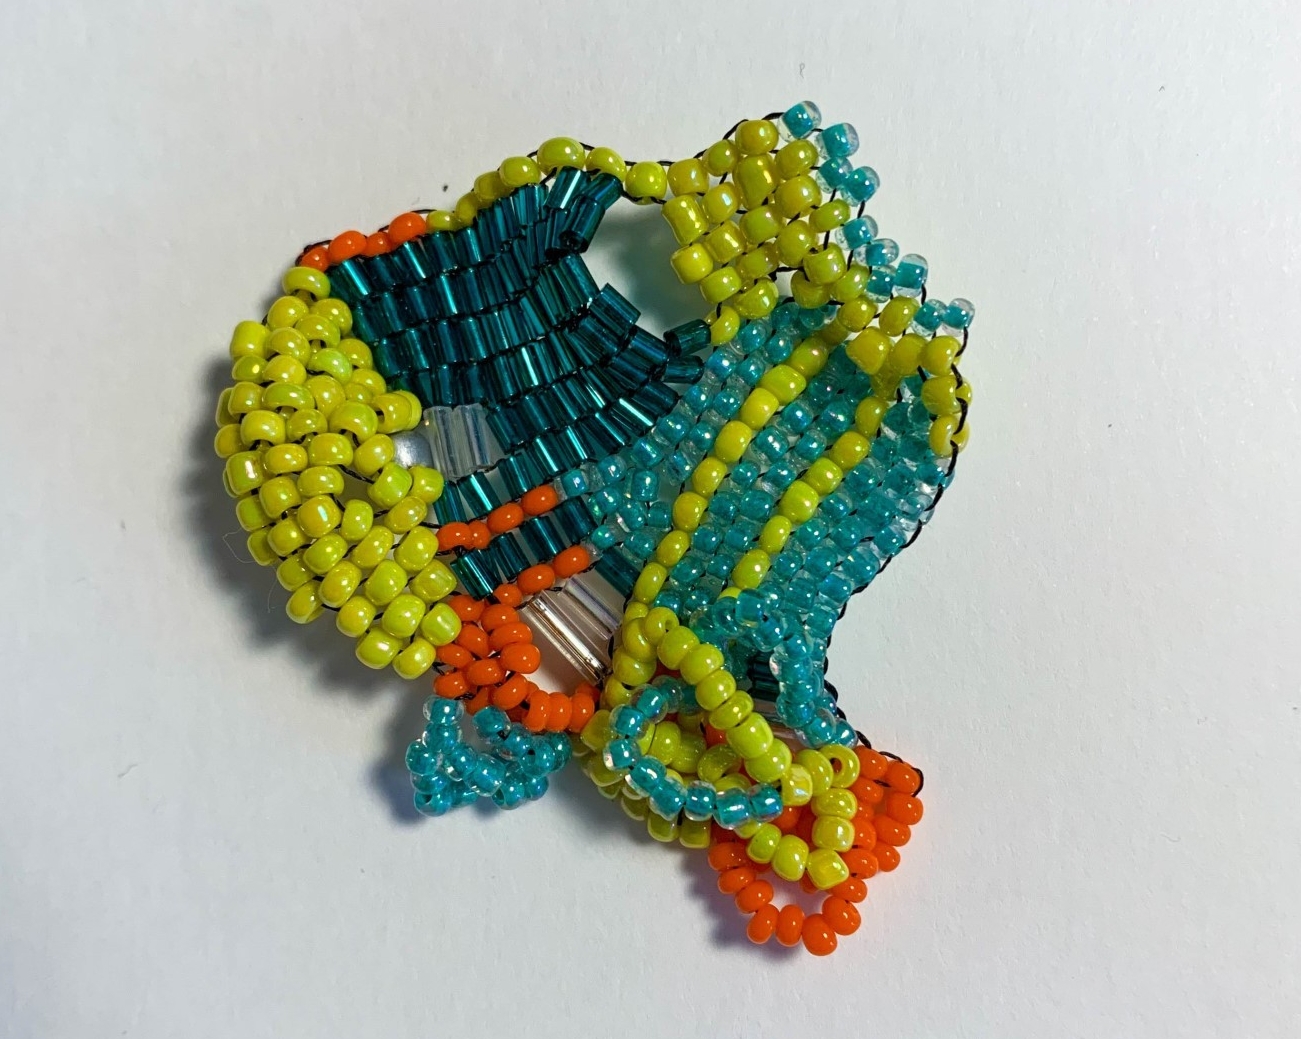 multicolored beadwork, counter-mapping turtle island territories. glass beads yellow,turquoise, navy blue, and orange